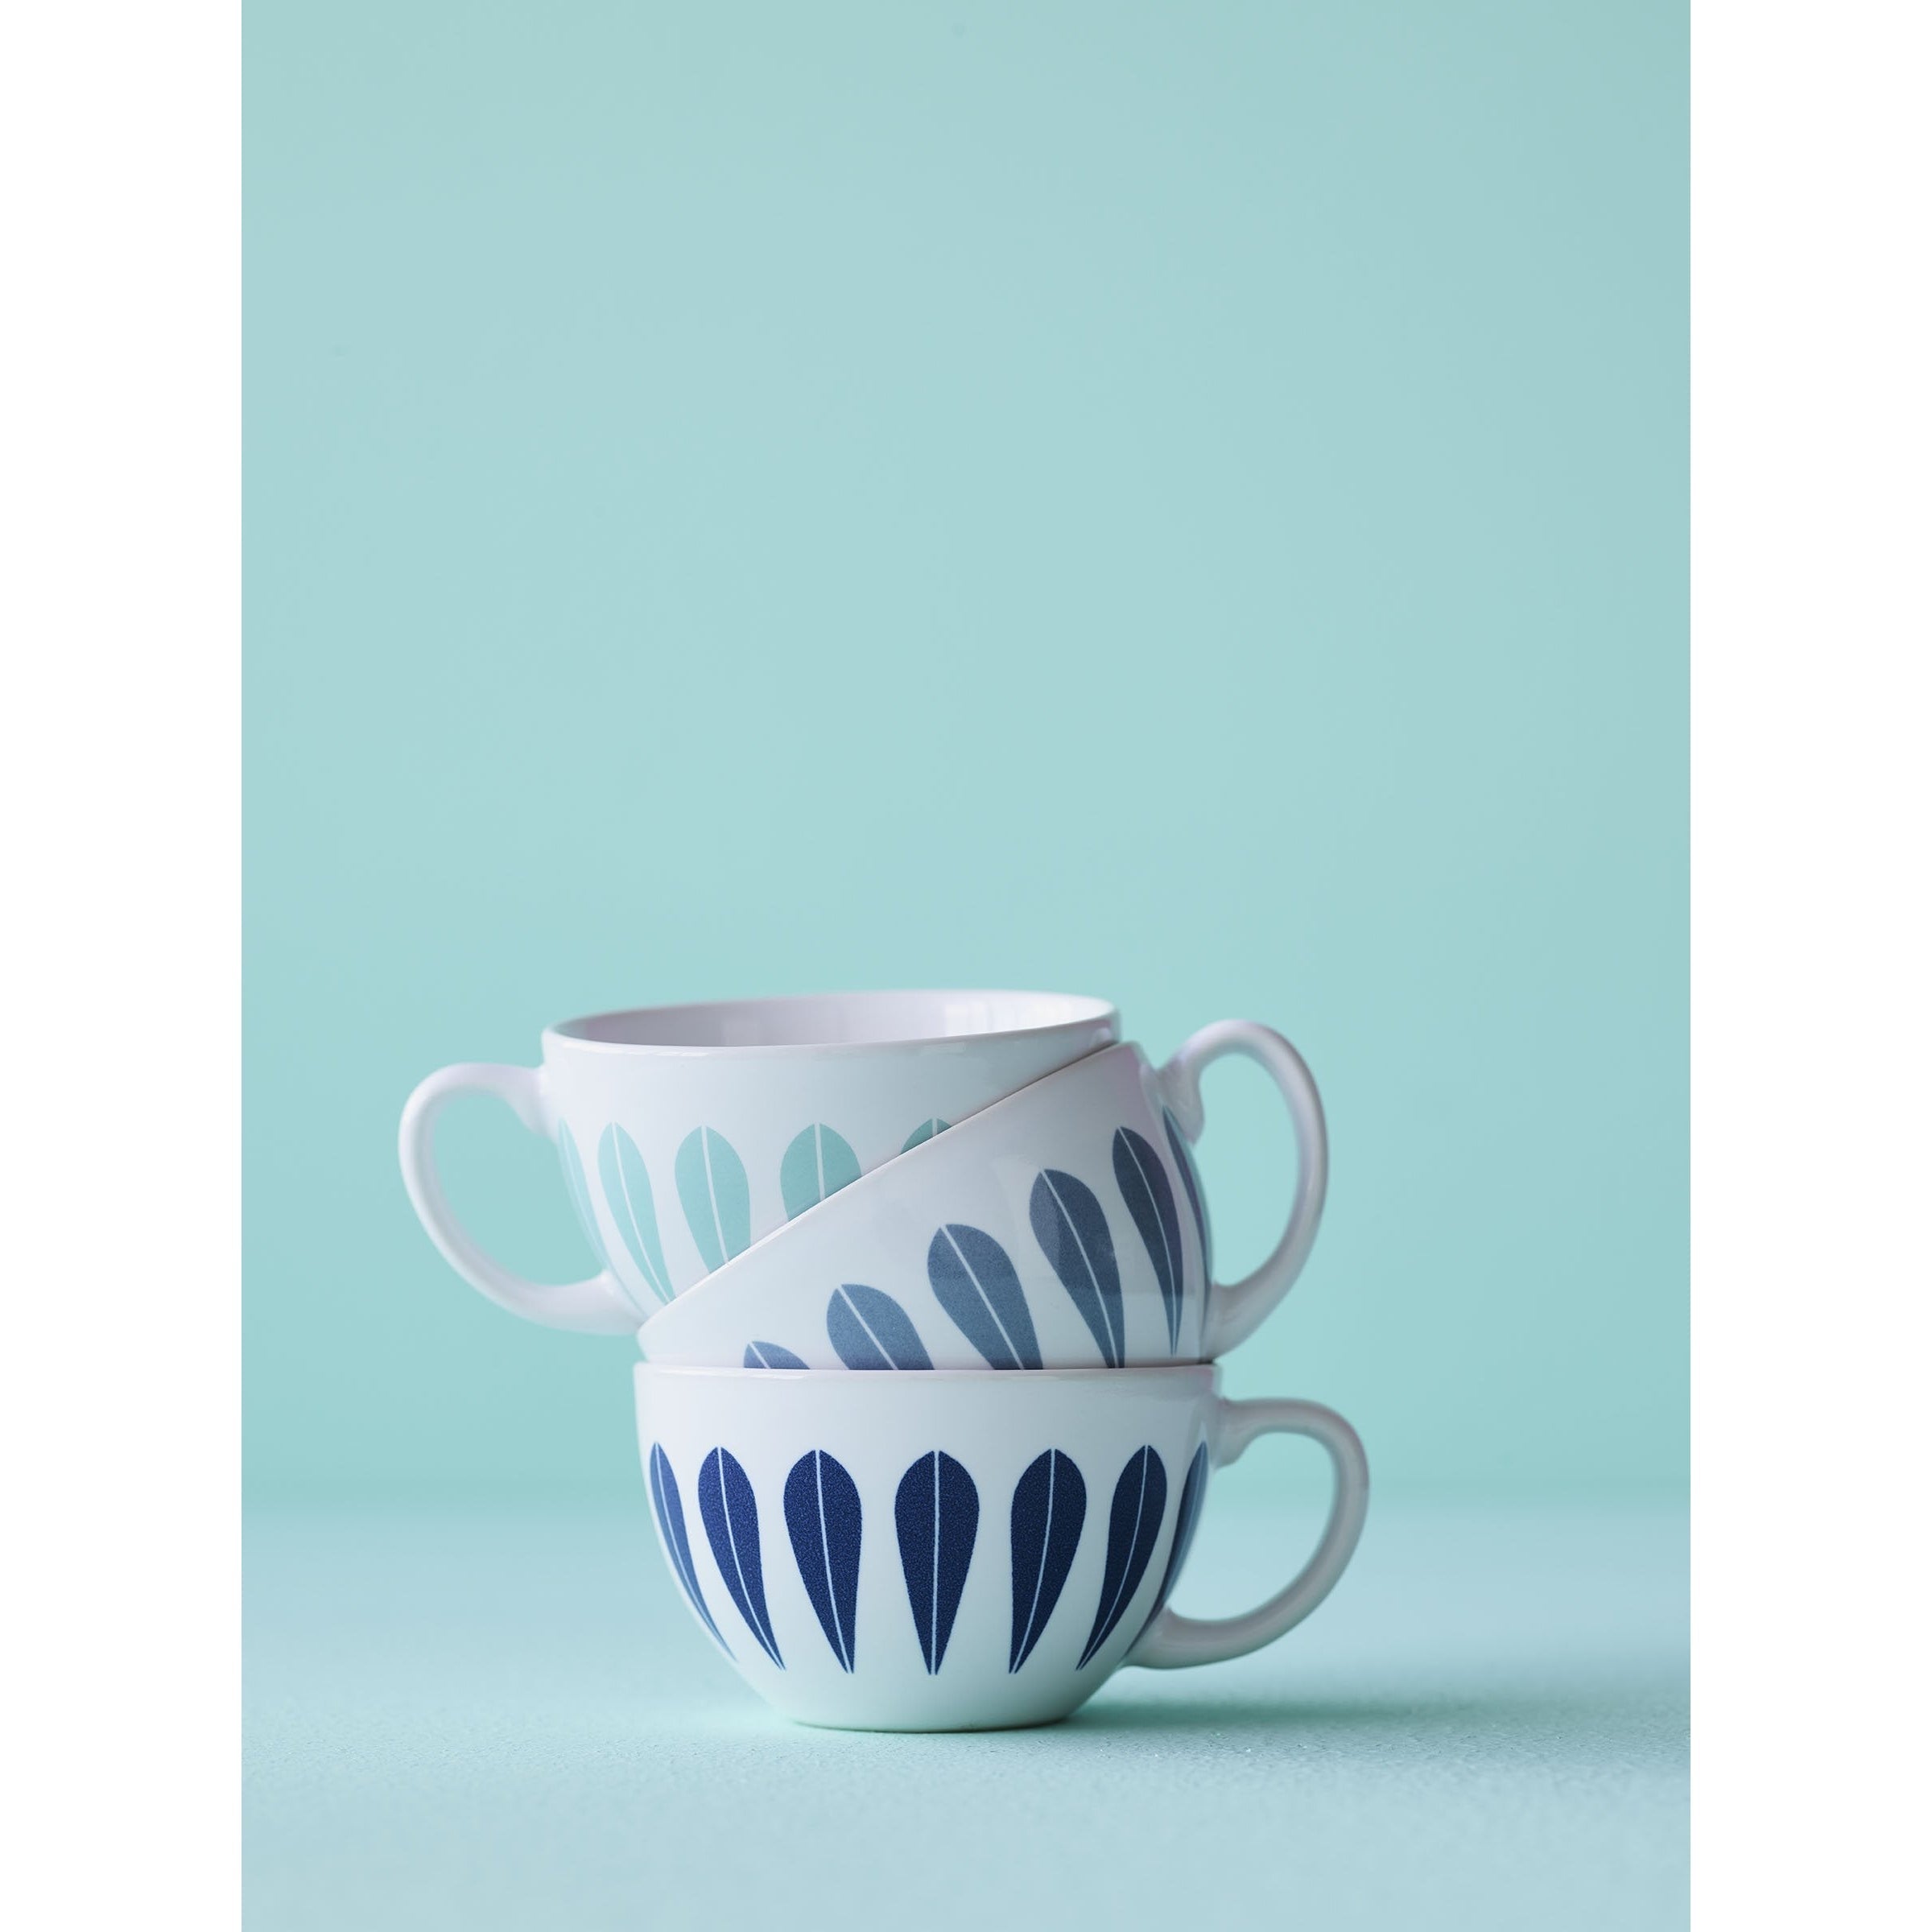 Lucie Kaas Arne Clausen Collection Cups W. Saucer Grey, 10 cm